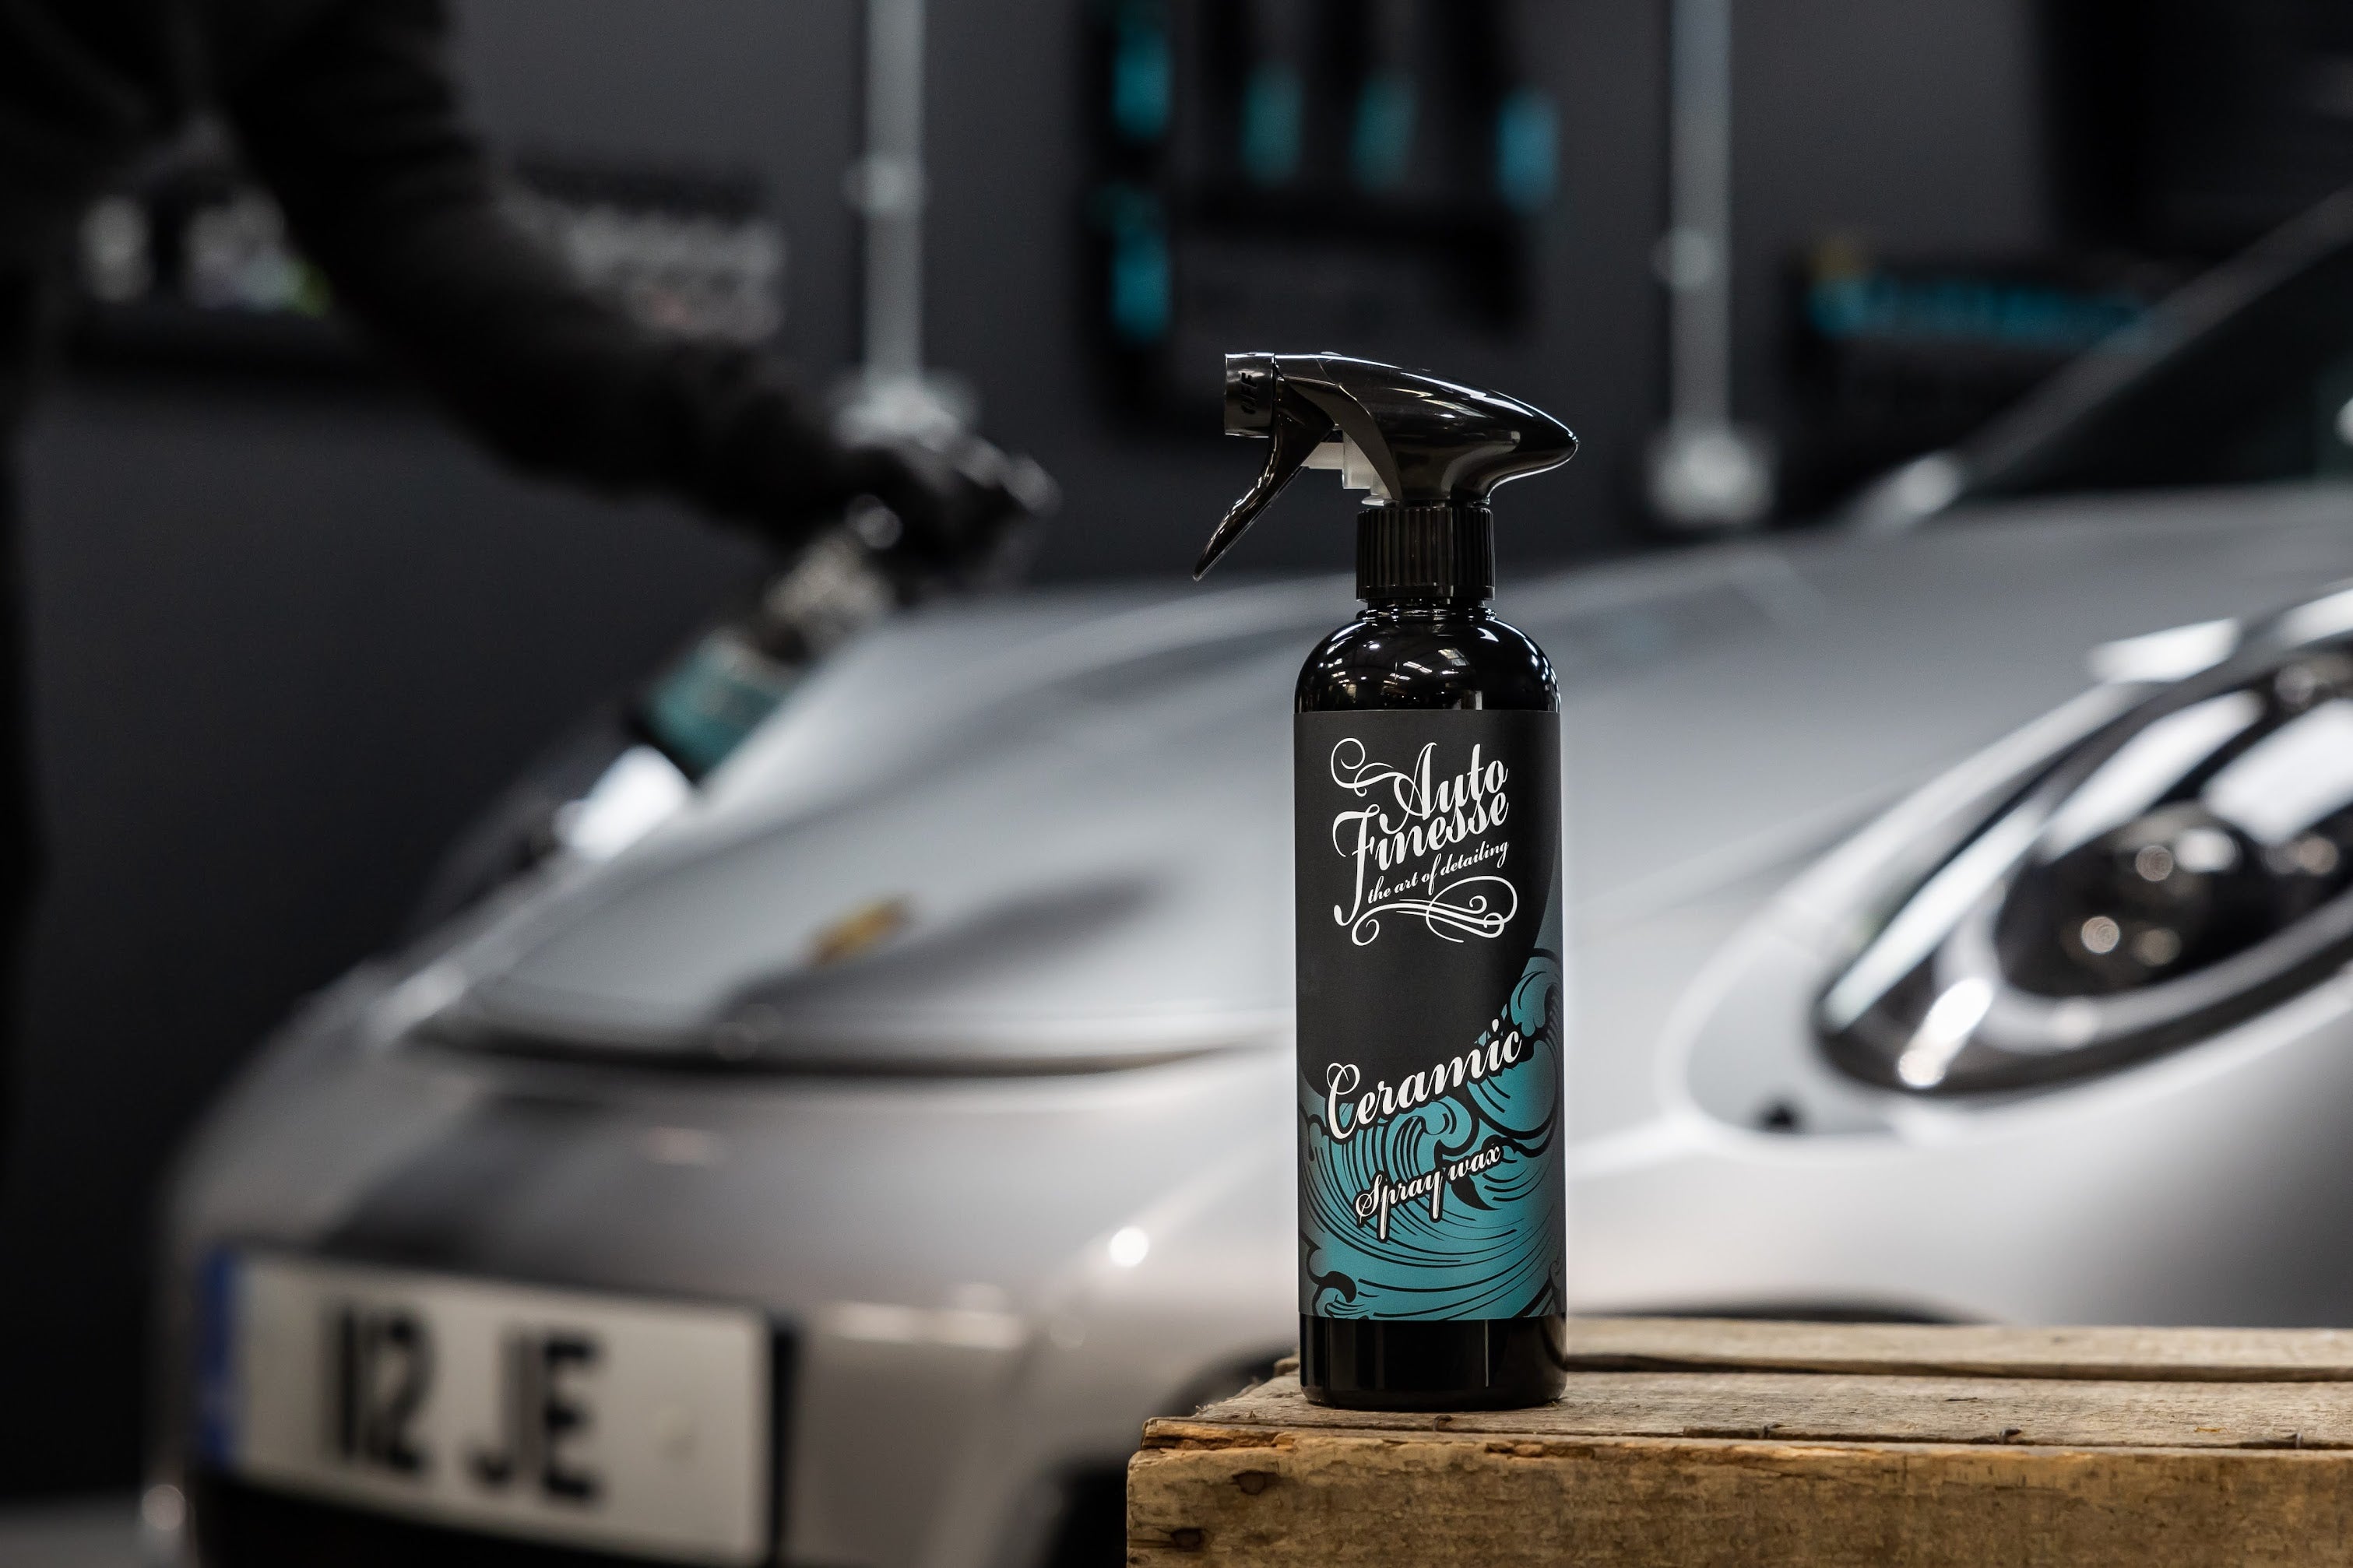 Car Detailing Products, Designed, Developed & Trusted by Detailers